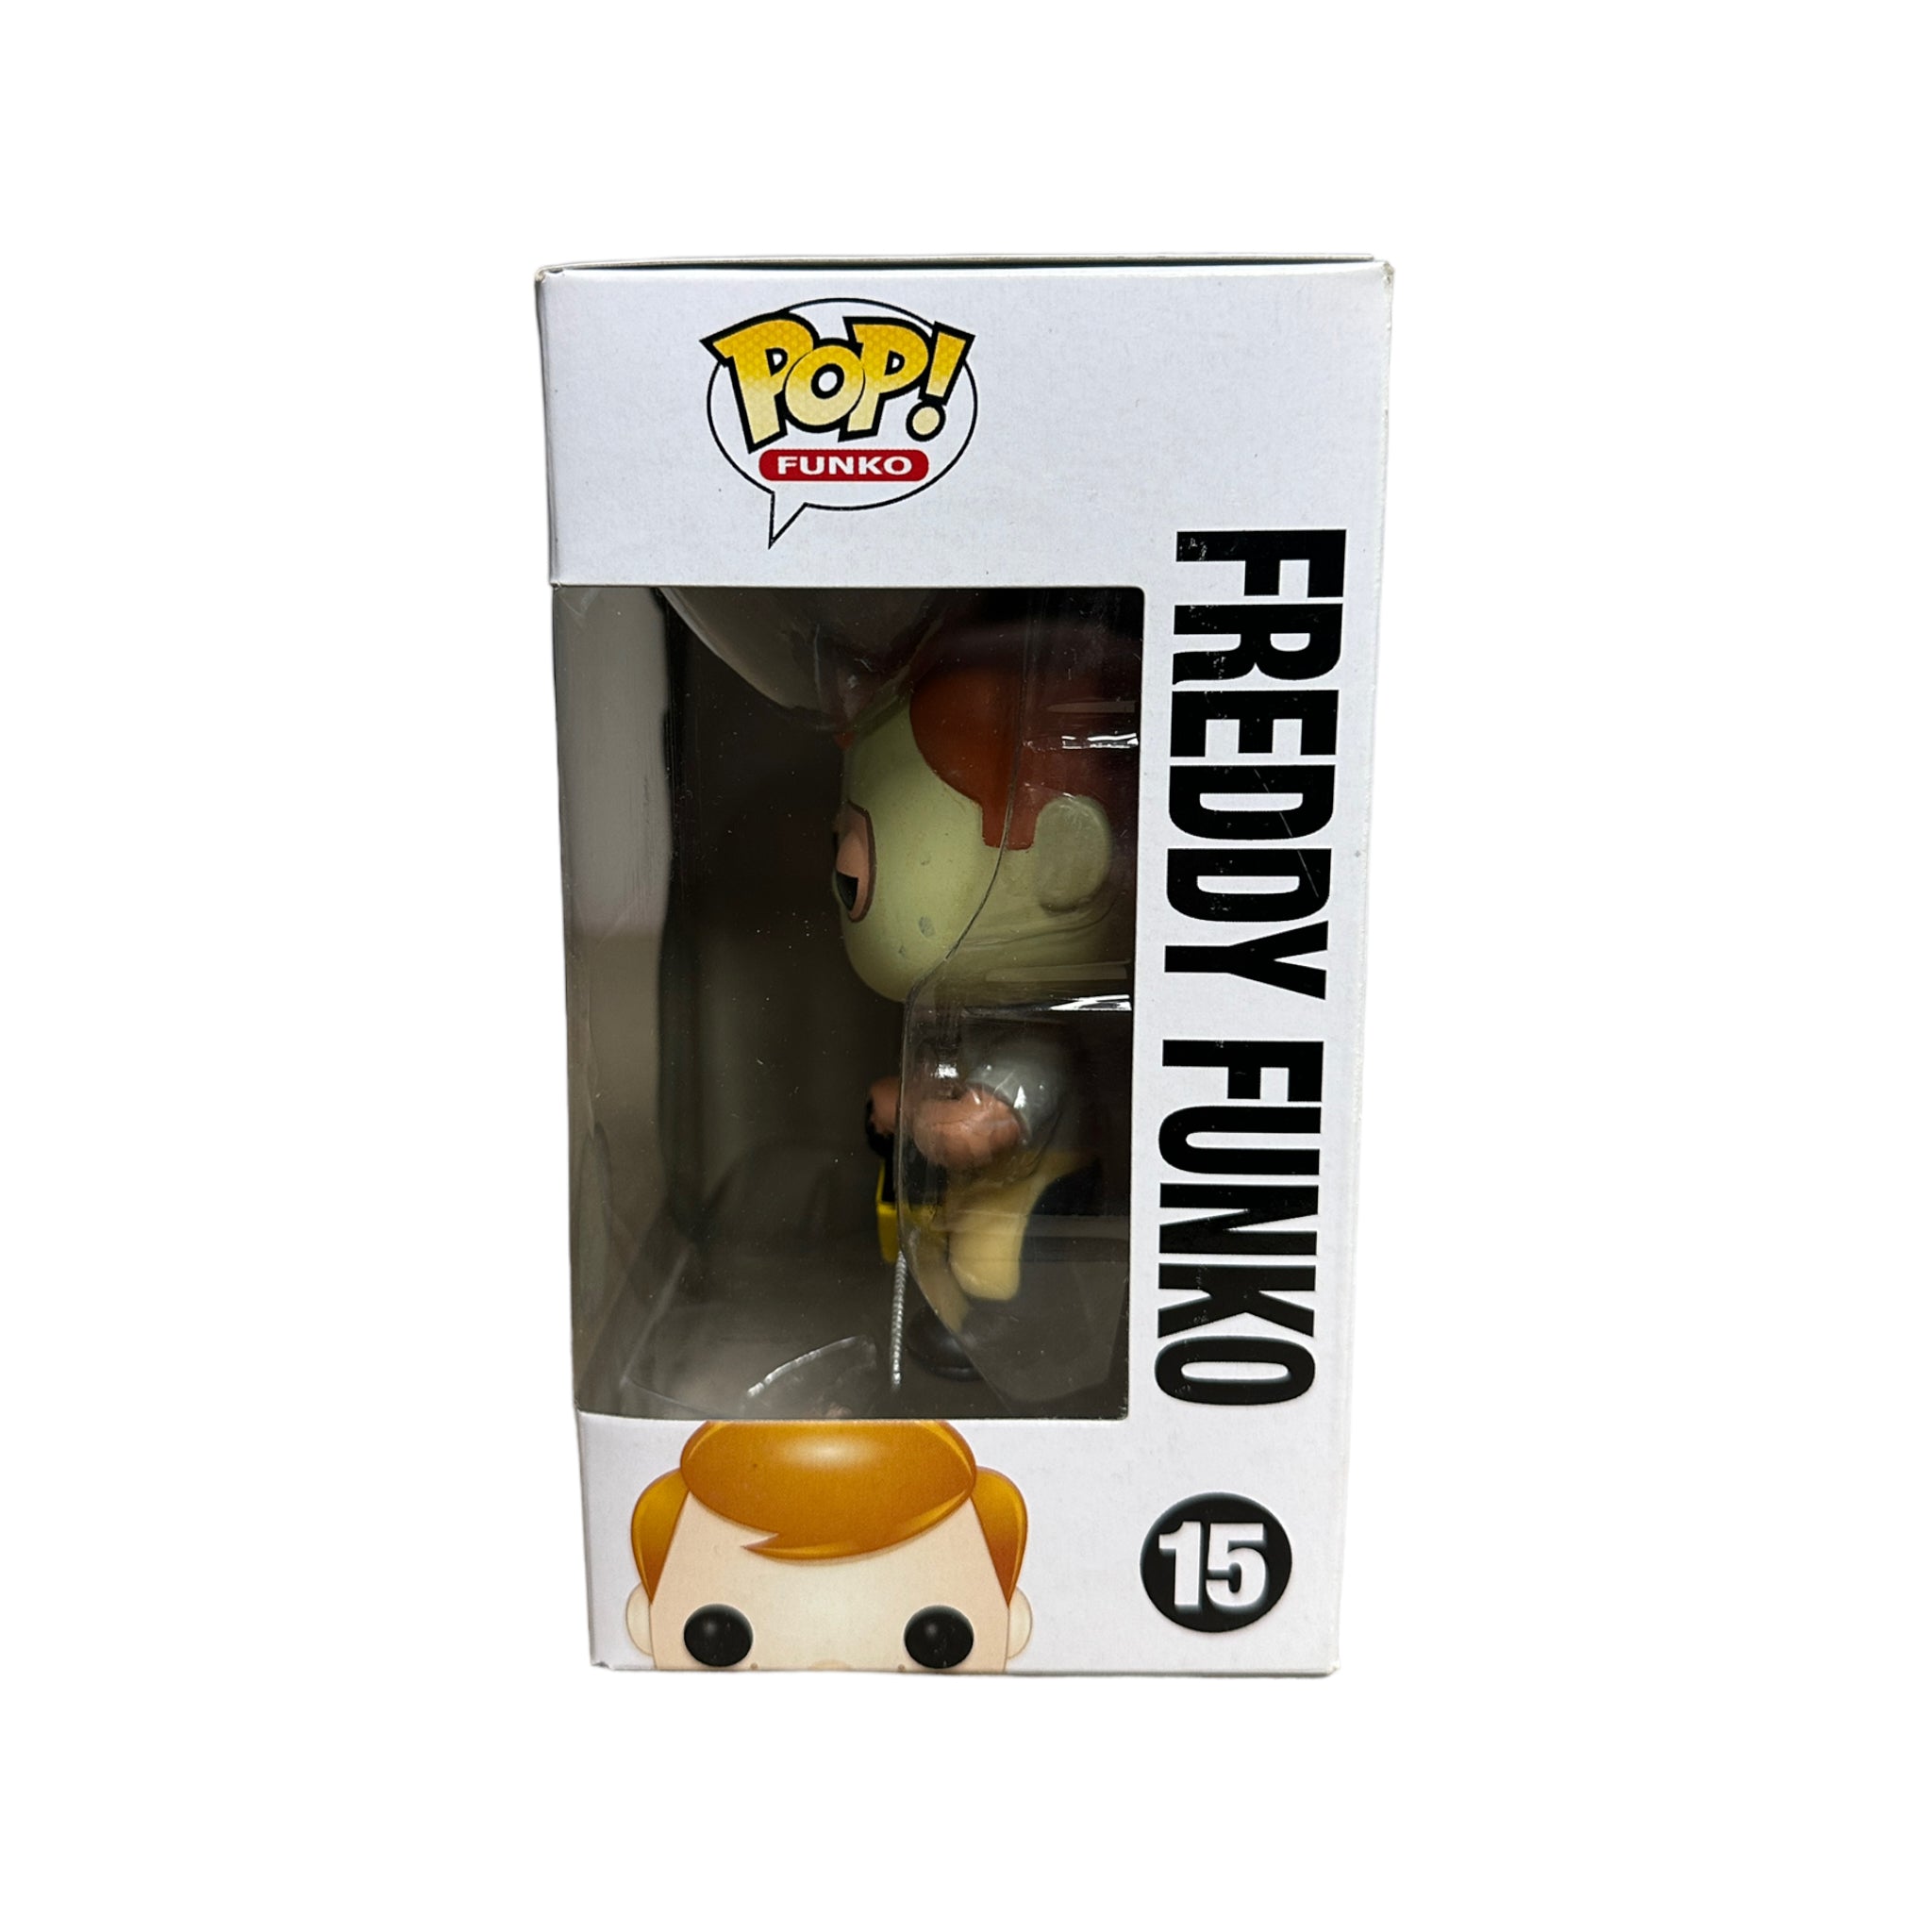 Freddy Funko as Leatherface #15 Funko Pop! - SDCC 2012 Exclusive LE96 Pcs - Condition 7.5/10